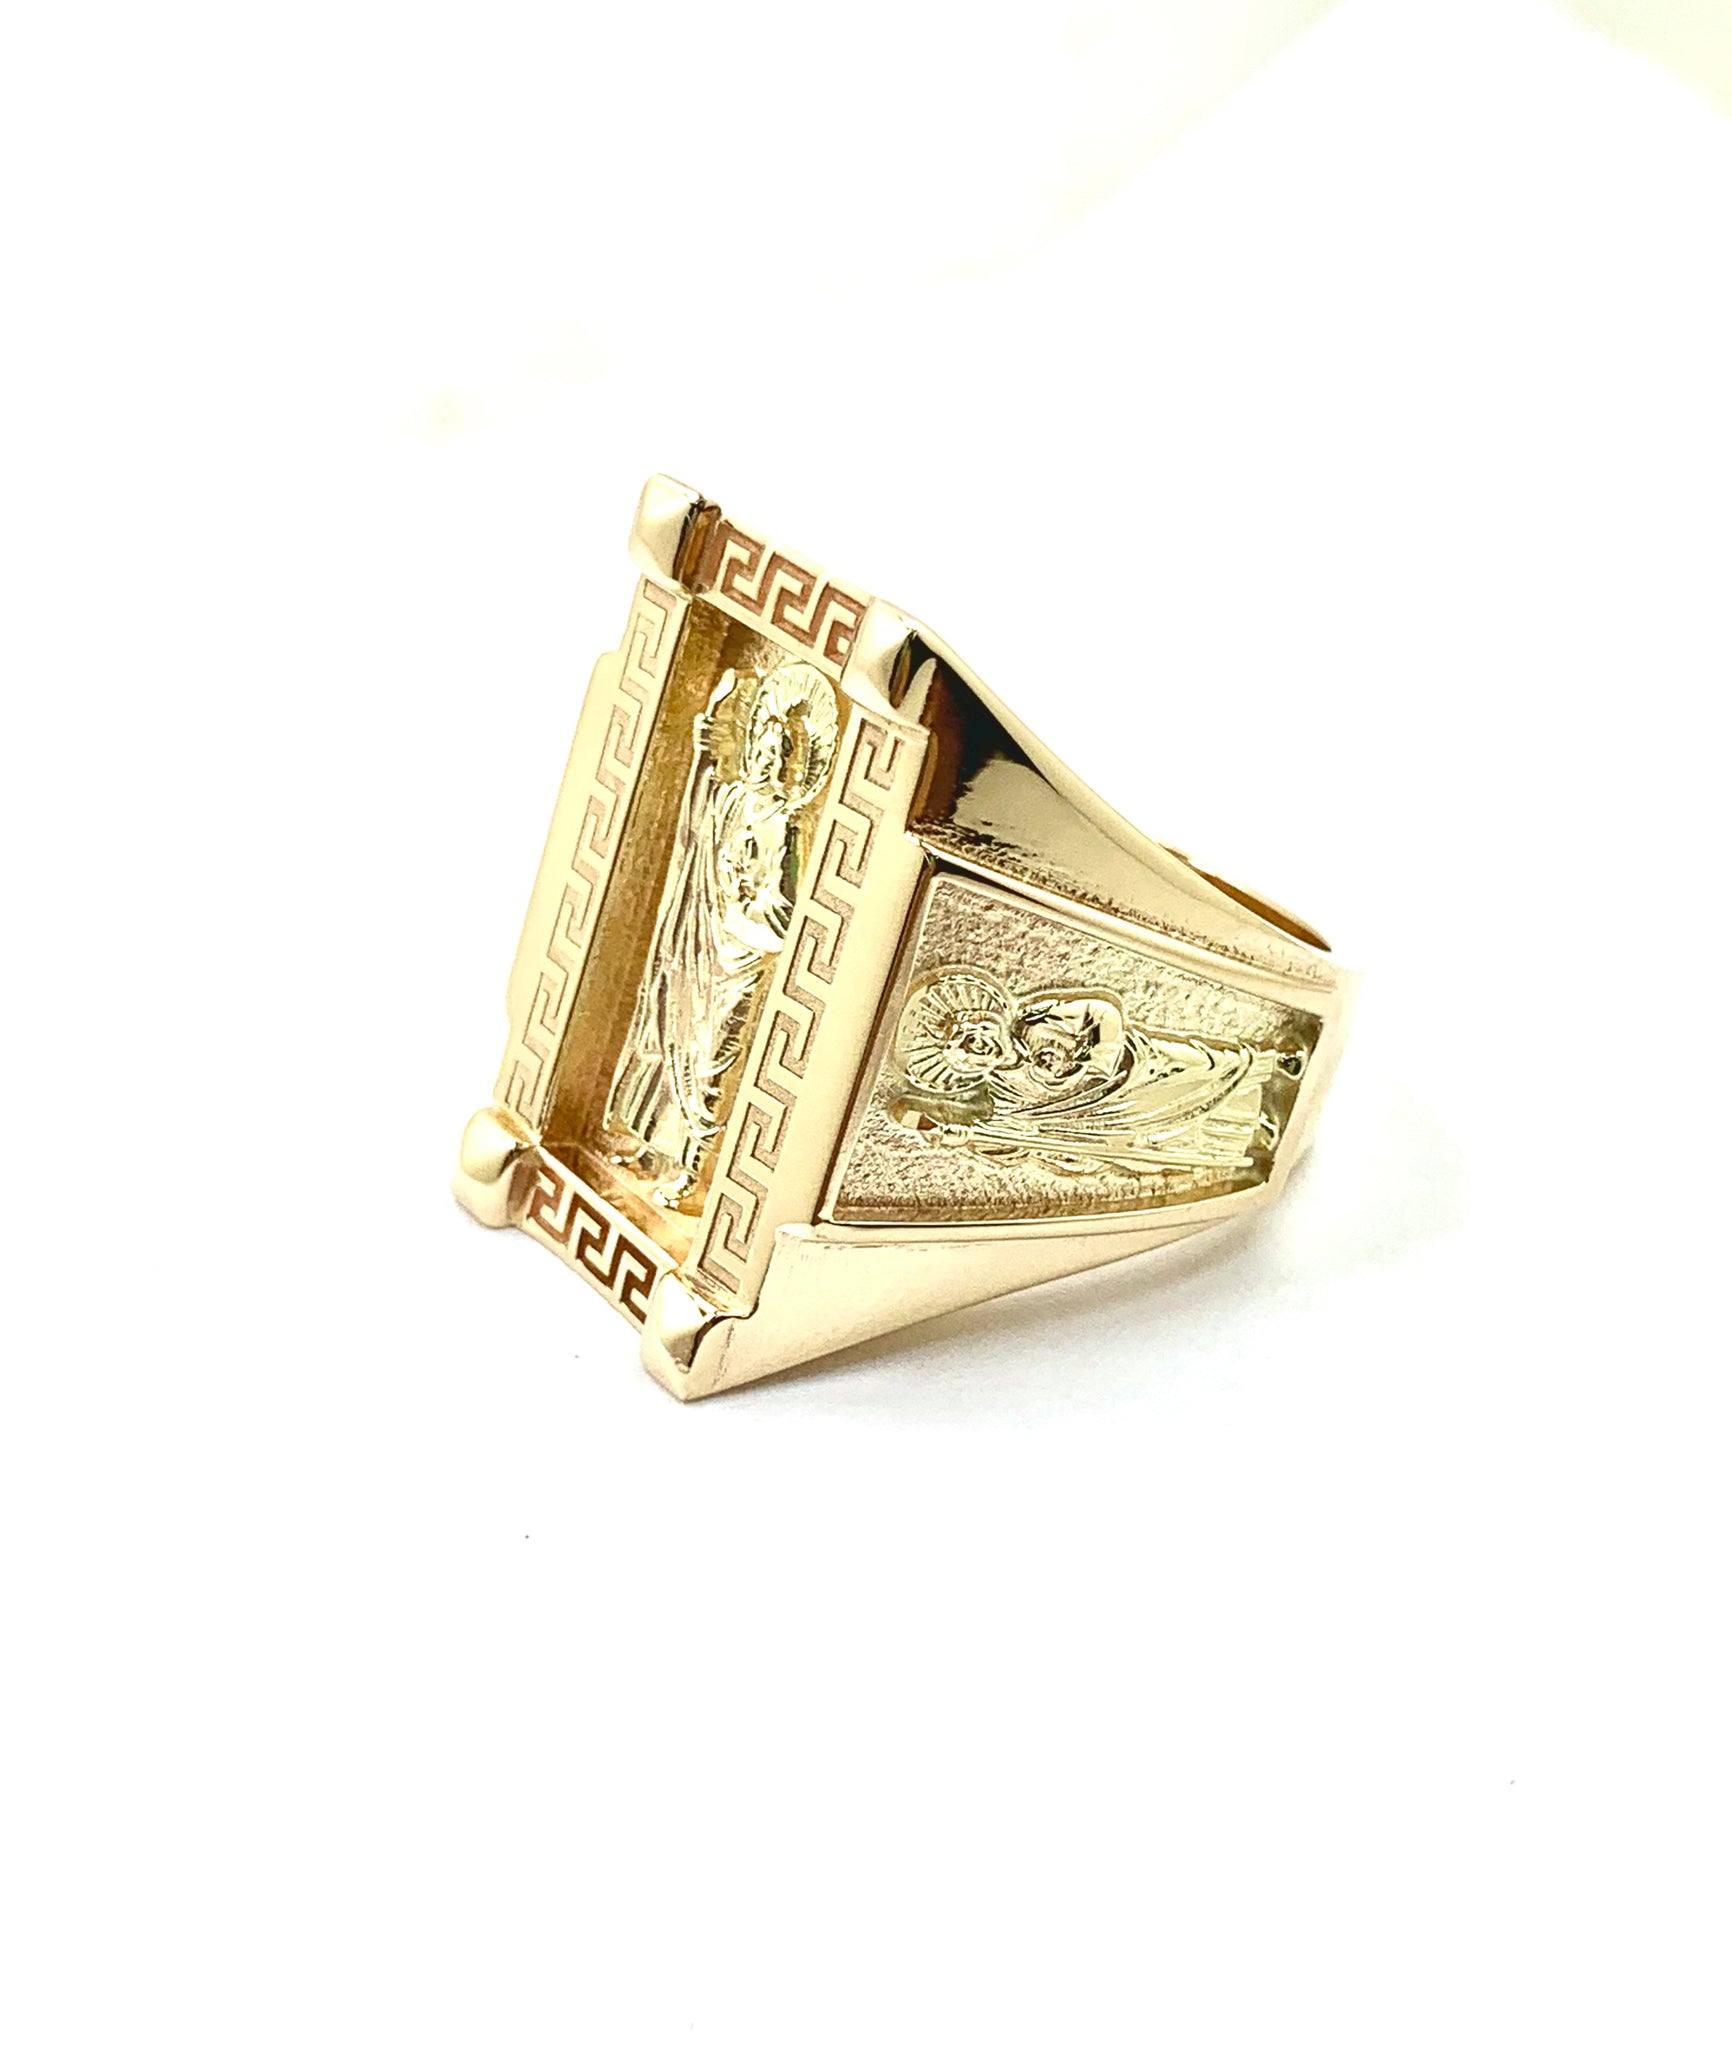 Custom 18k Gold Ring with Bezel Set Electric Teal Tourmaline | Exquisite  Jewelry for Every Occasion | FWCJ